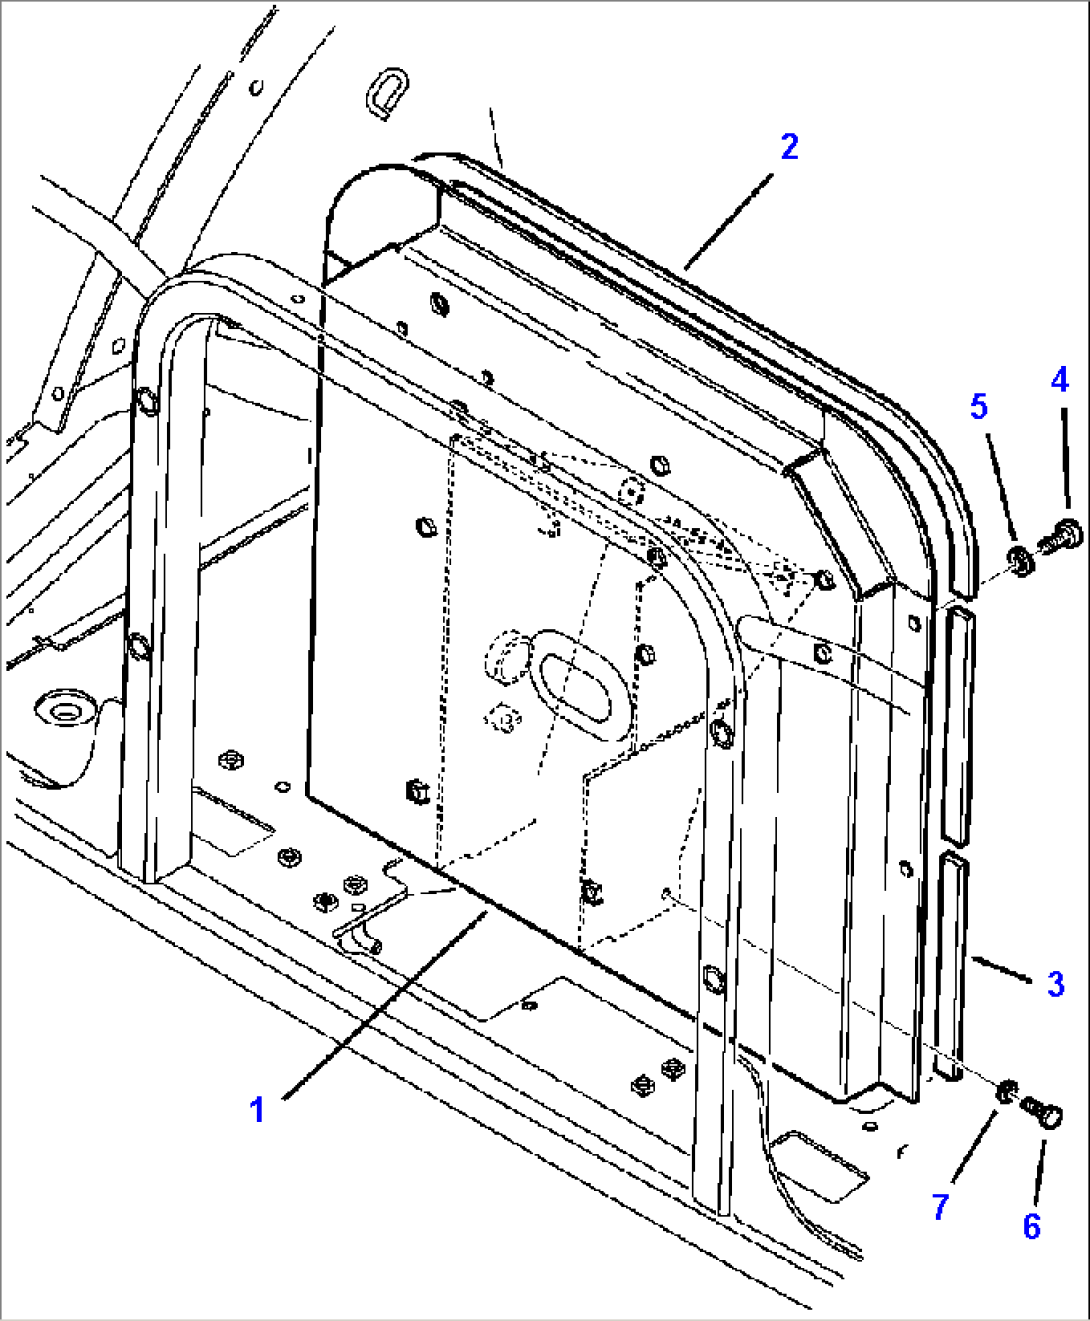 K5112-01A0 CAB WITHOUT AIR CONDITIONING FRONT FRAME